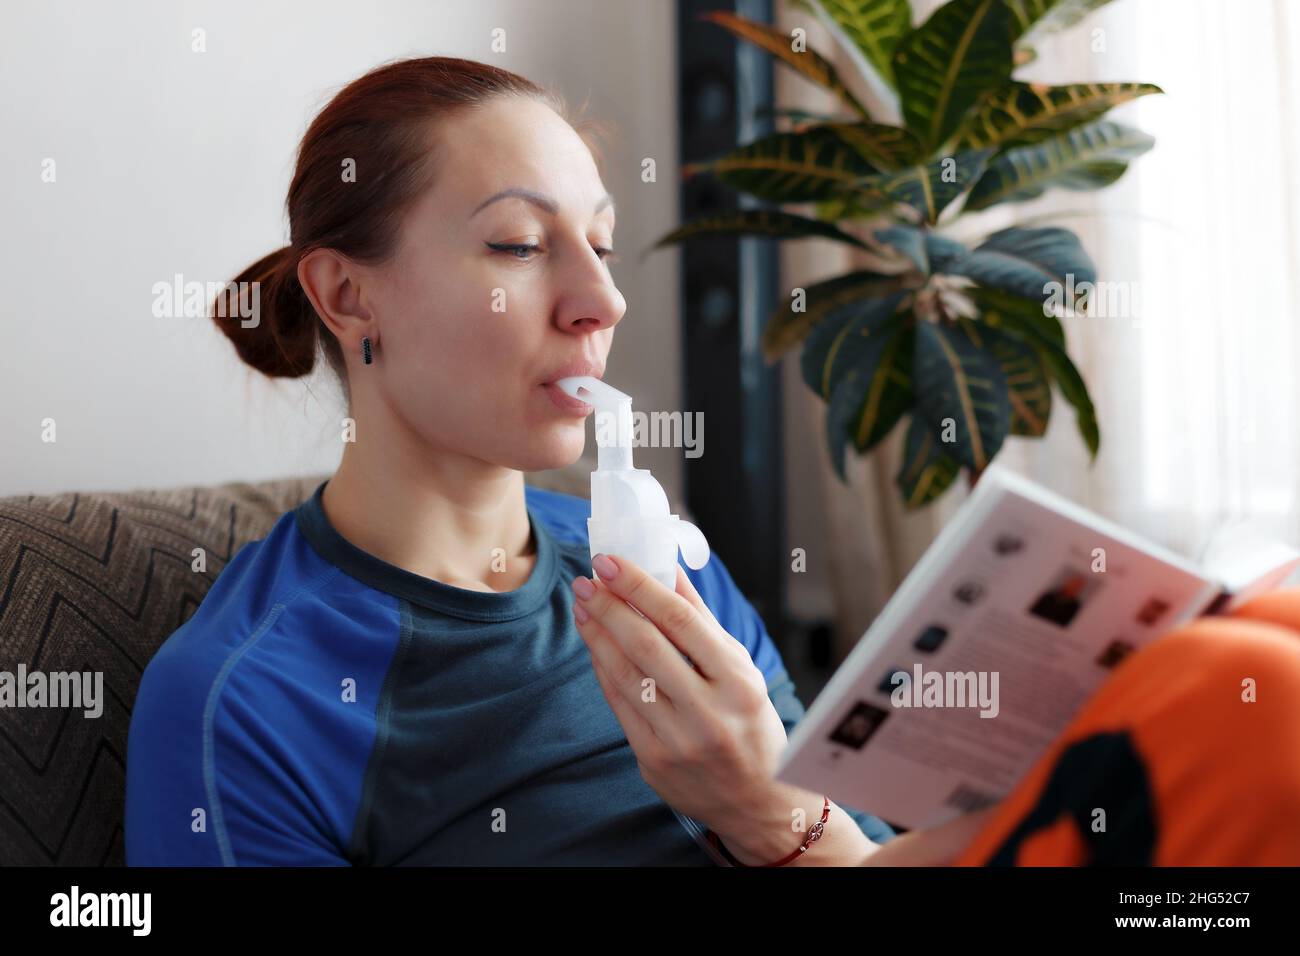 A caucasian woman is reading a book and holding a nebulizer tube, inhaling vapors of medicines into her lungs. Treating asthma or cold flu at home. Inhalation in respiratory diseases. Stock Photo